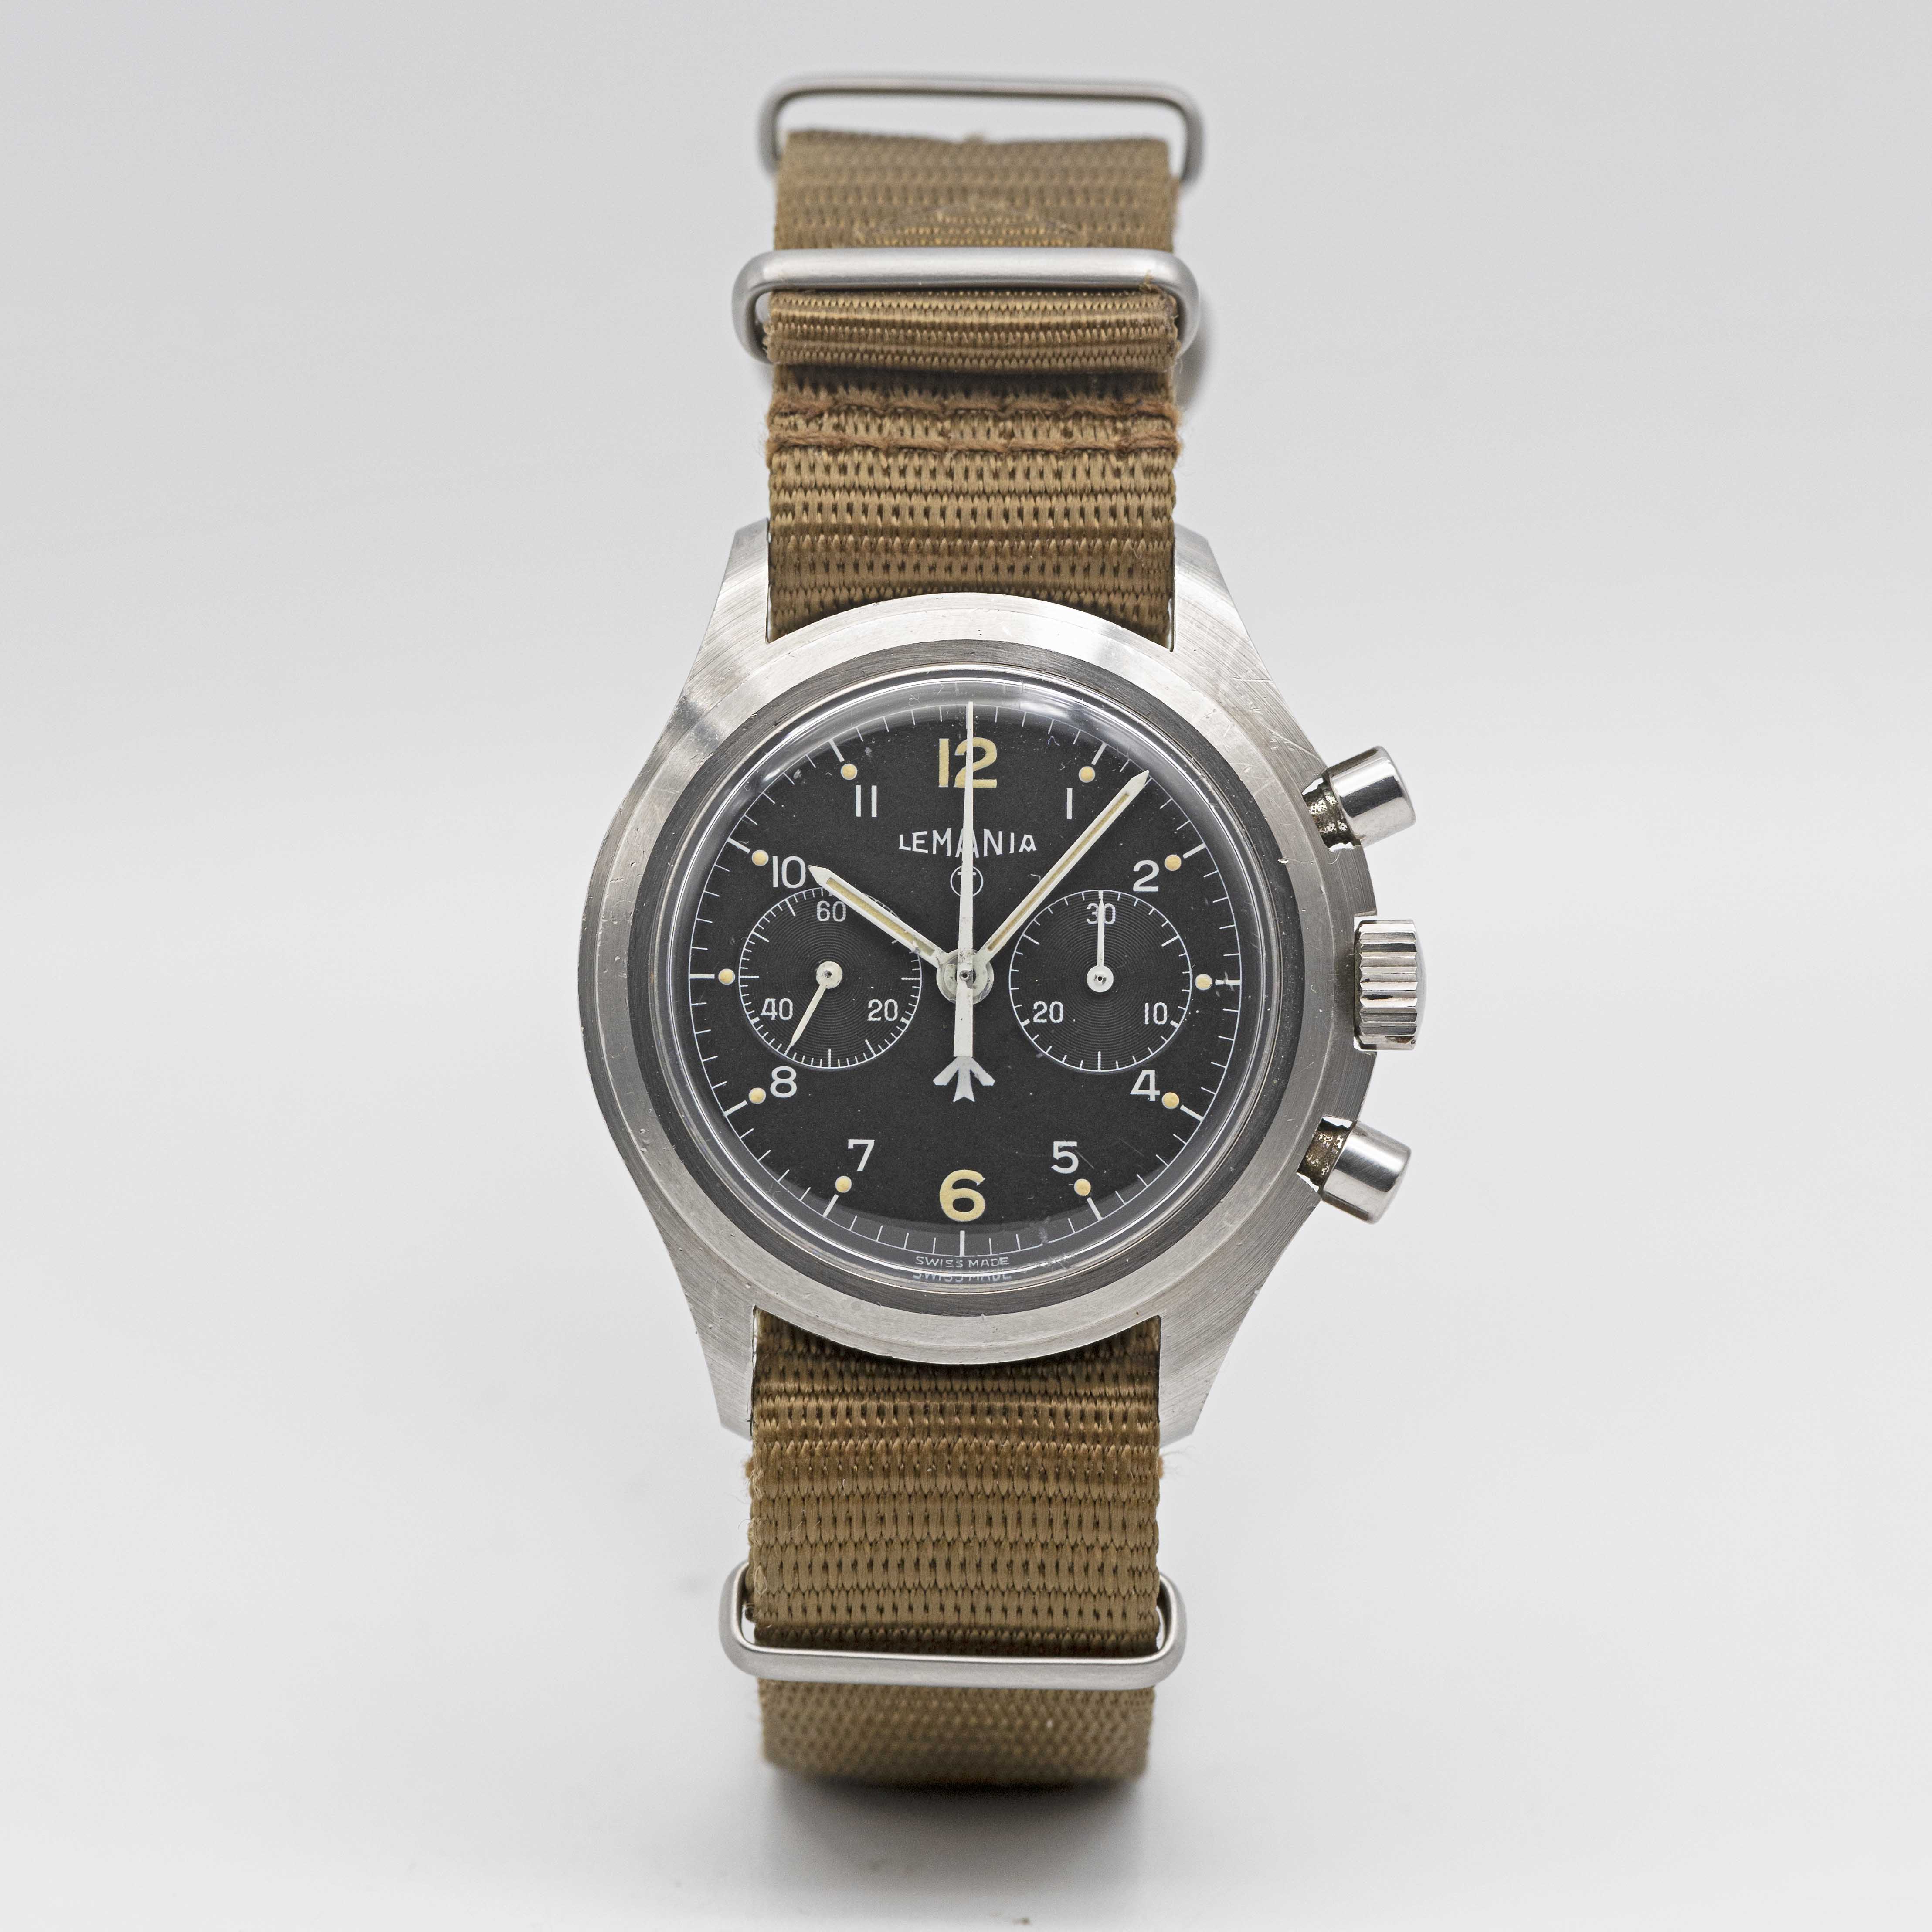 A RARE GENTLEMAN'S STAINLESS STEEL BRITISH MILITARY ROYAL NAVY LEMANIA "DOUBLE BUTTON" CHRONOGRAPH - Image 5 of 11